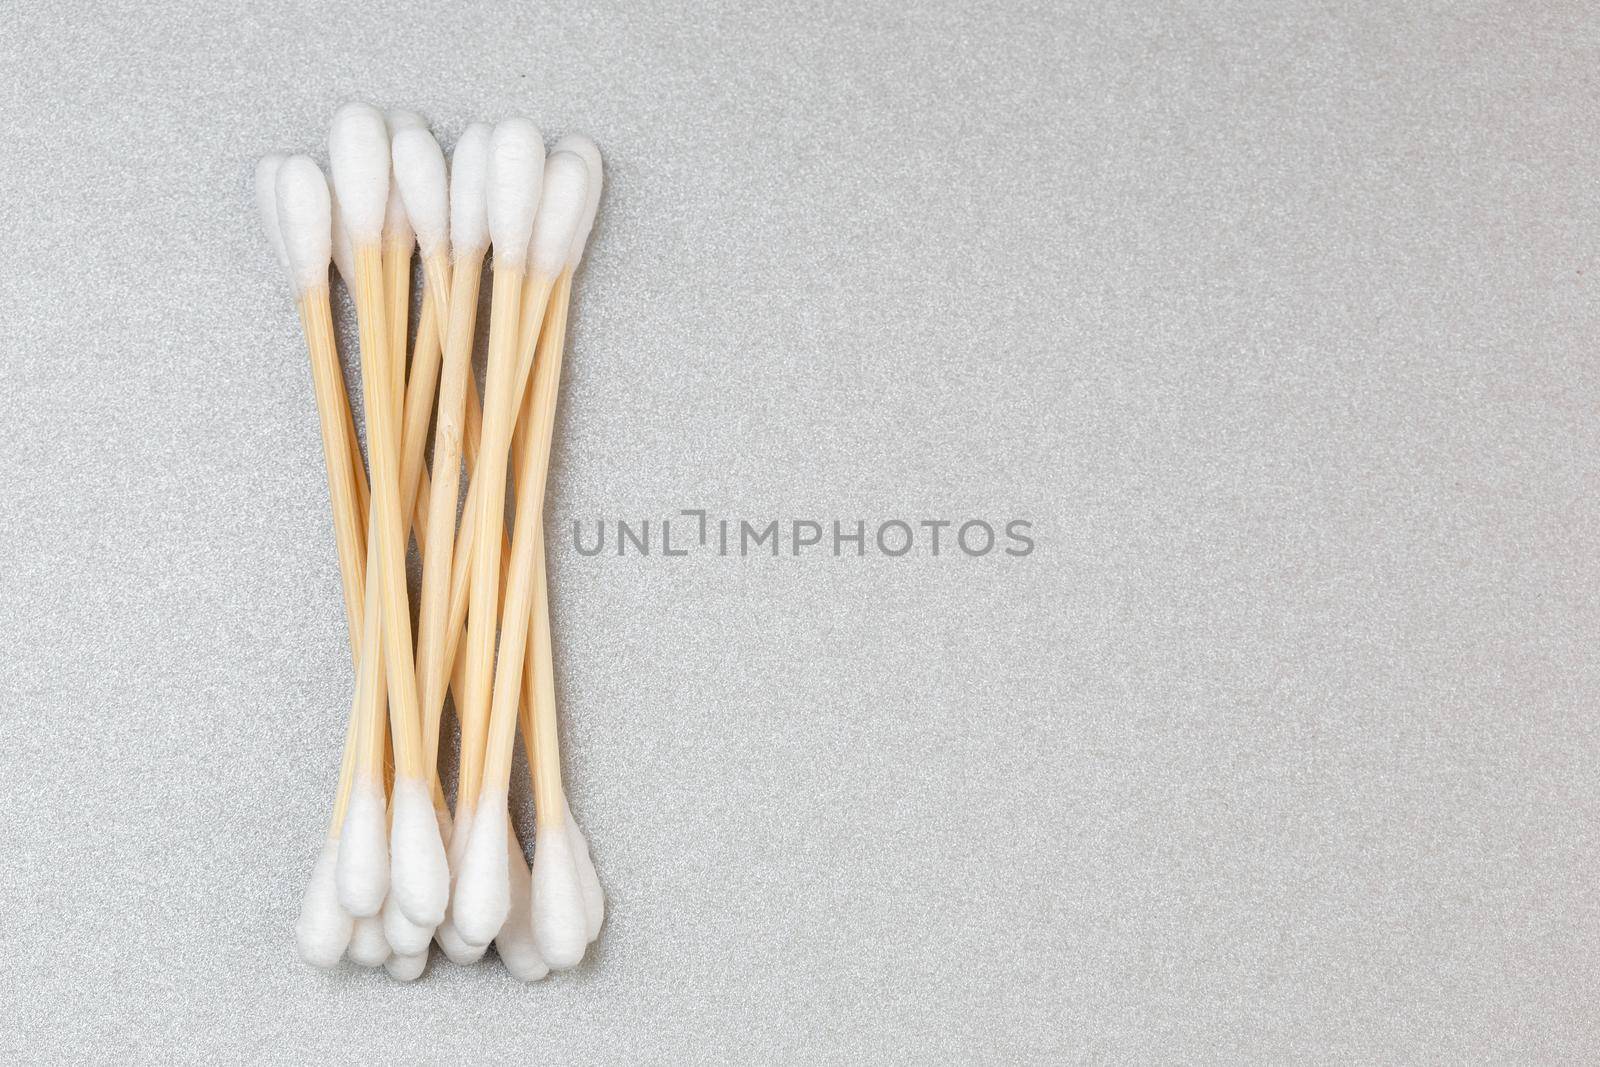 Bamboo cotton ear swabs on grey background with copy space. Sustainable hygienic accessory product concept.